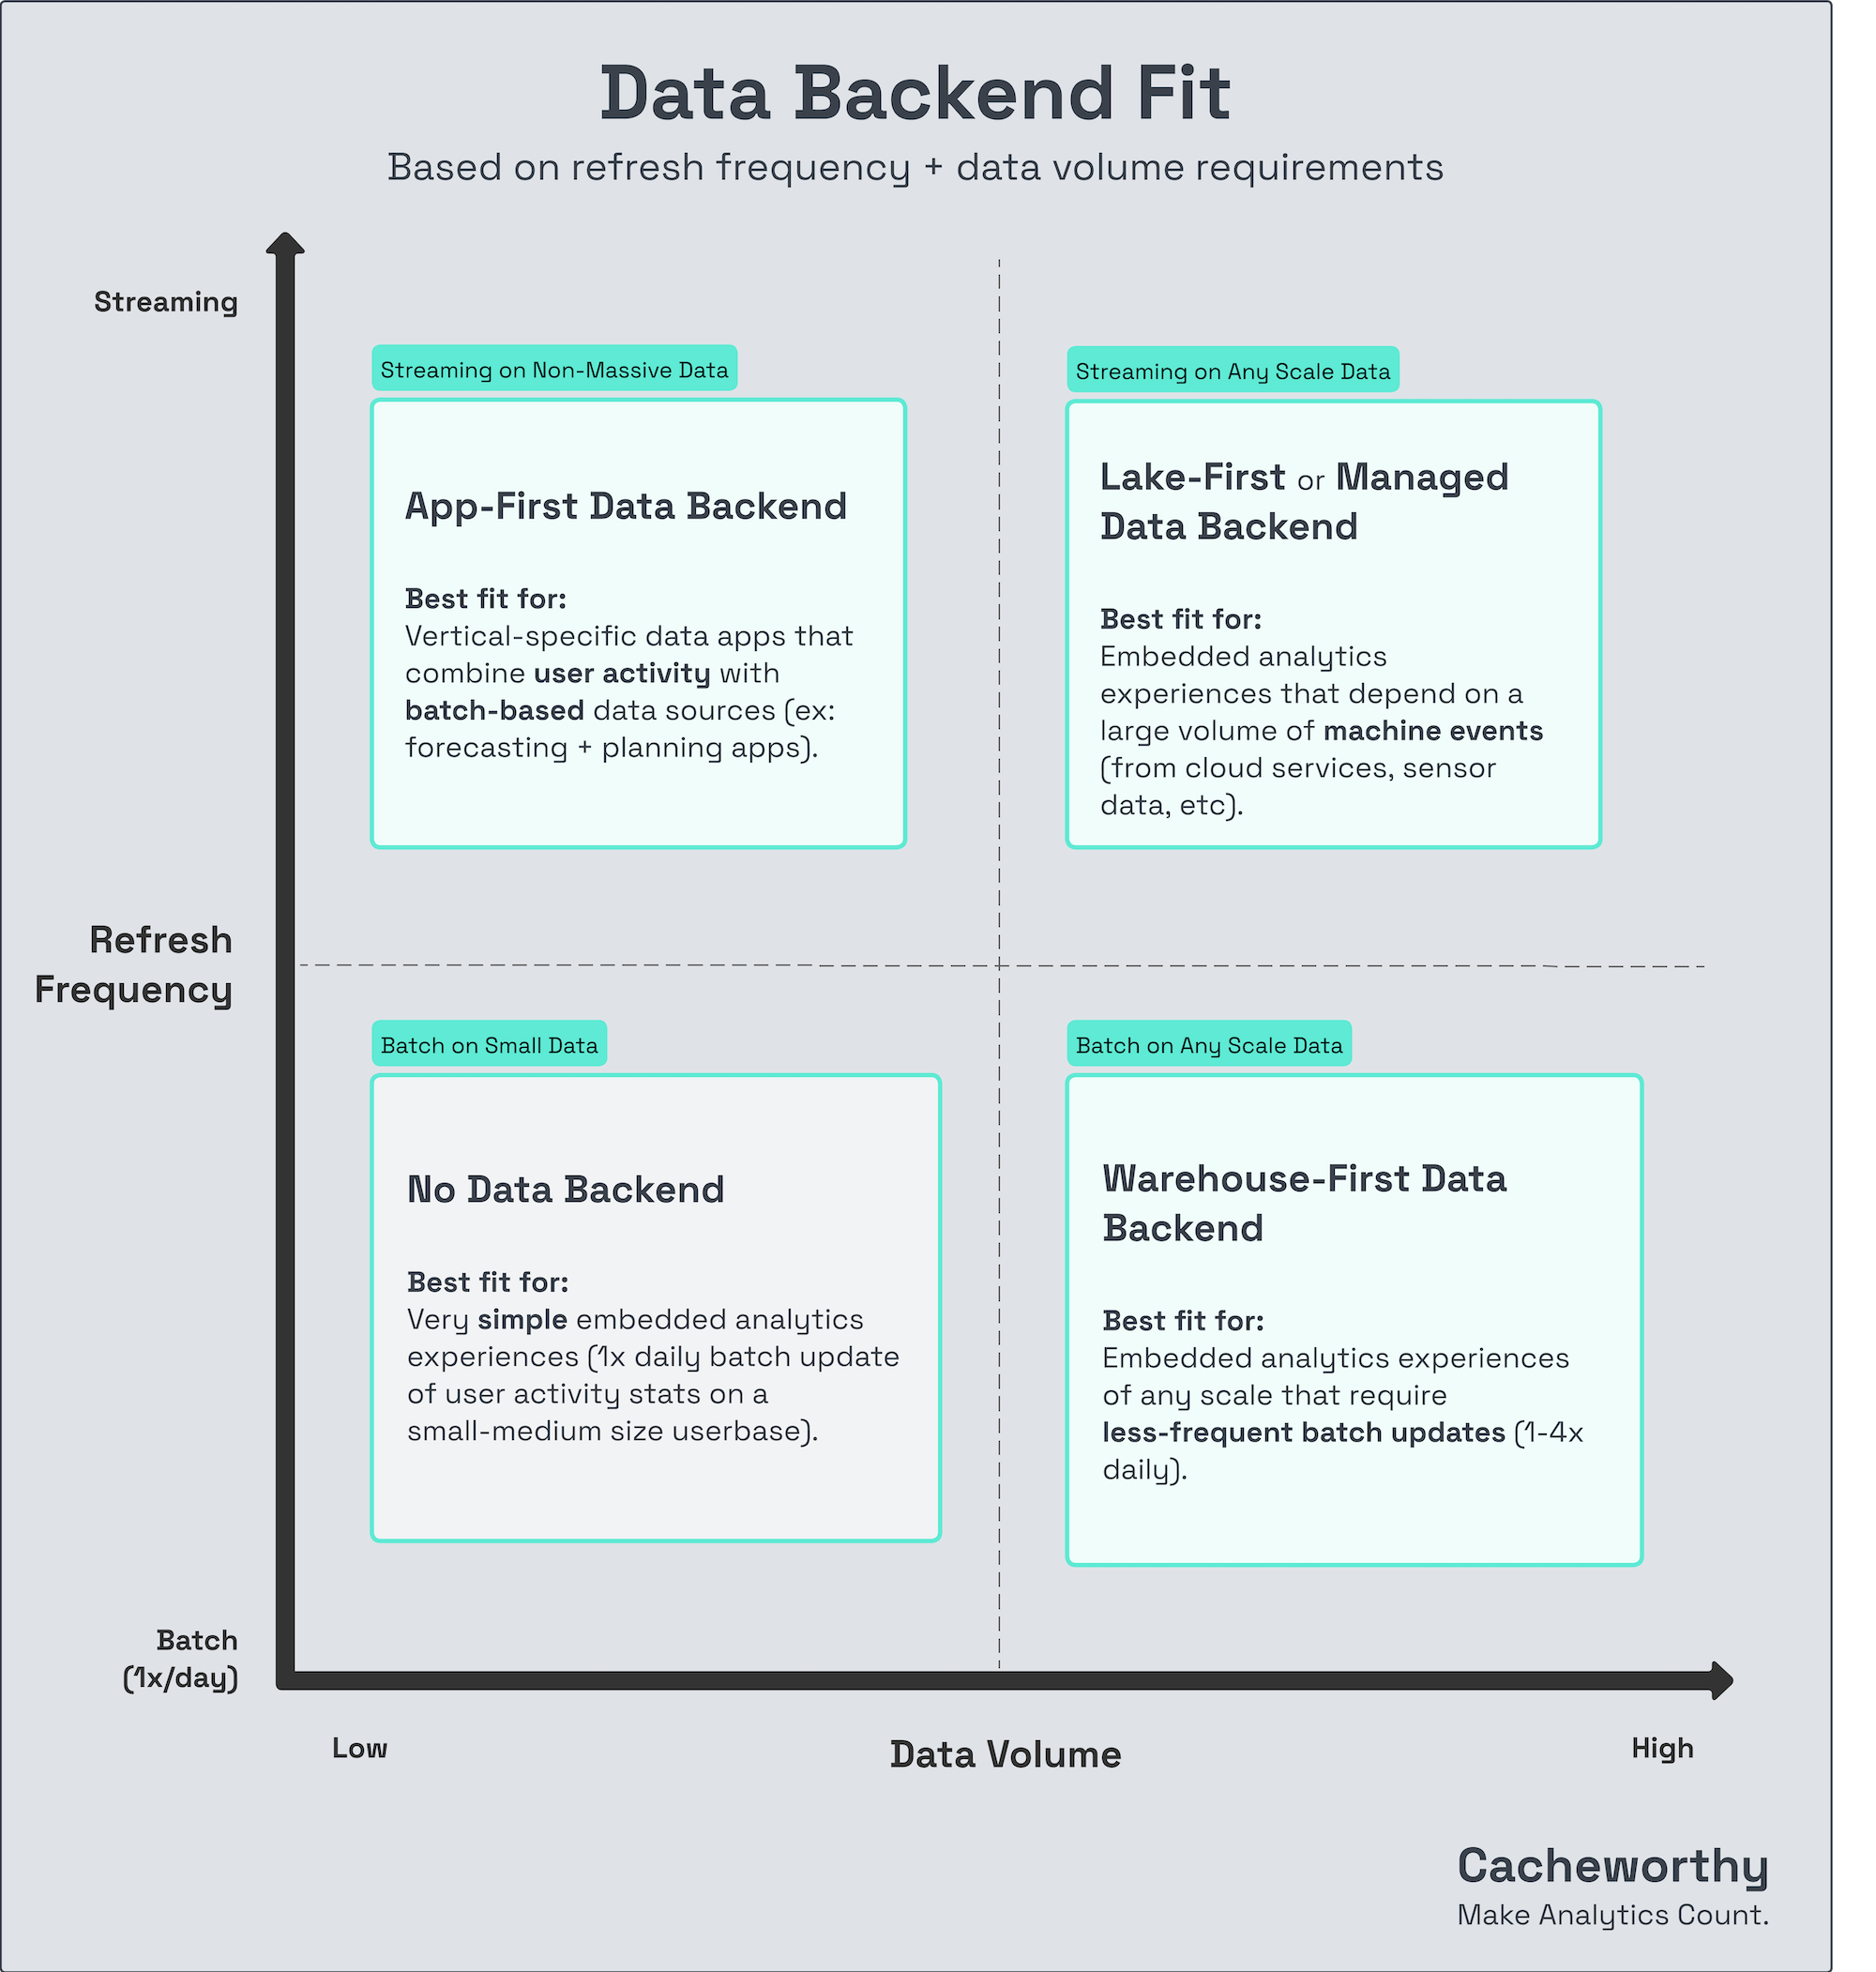 data backend use case fit